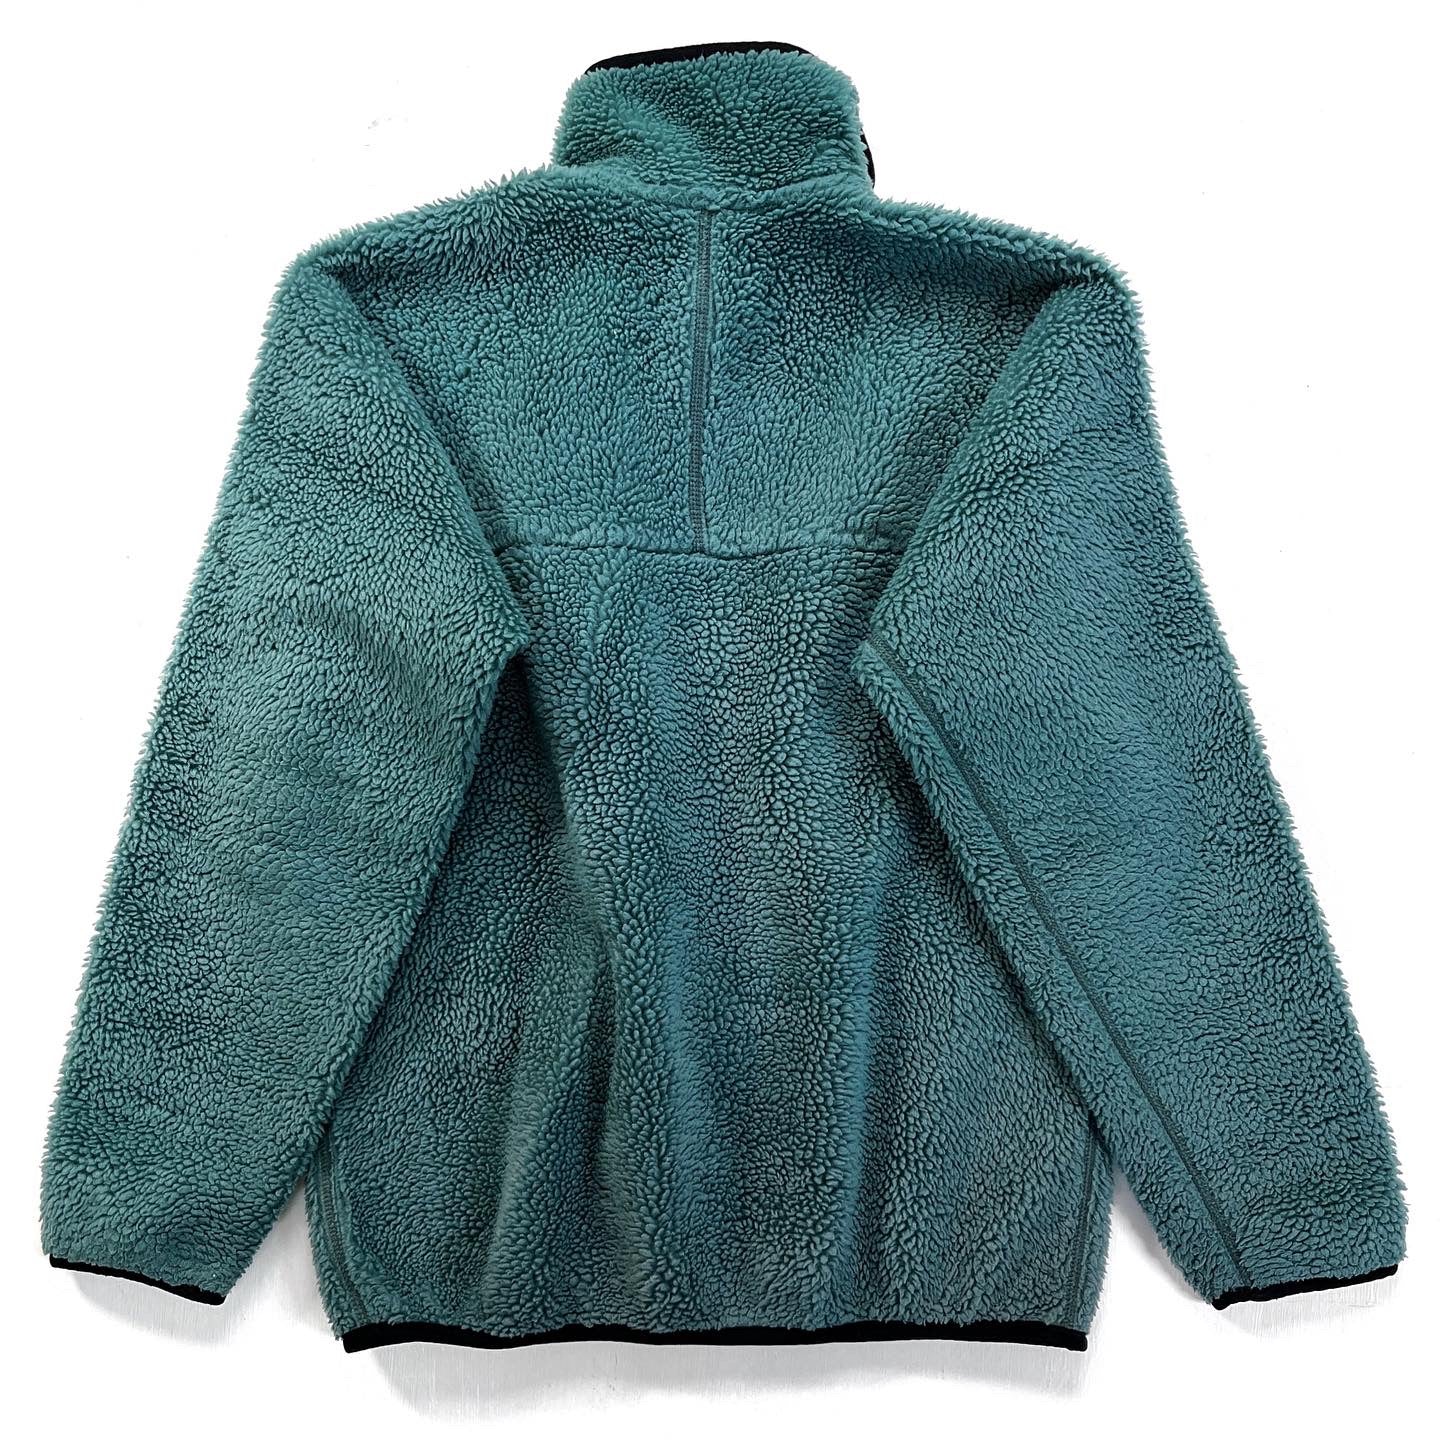 1996 Patagonia Made In The U.S.A. Retro Pile Cardigan, Fir Green (S)